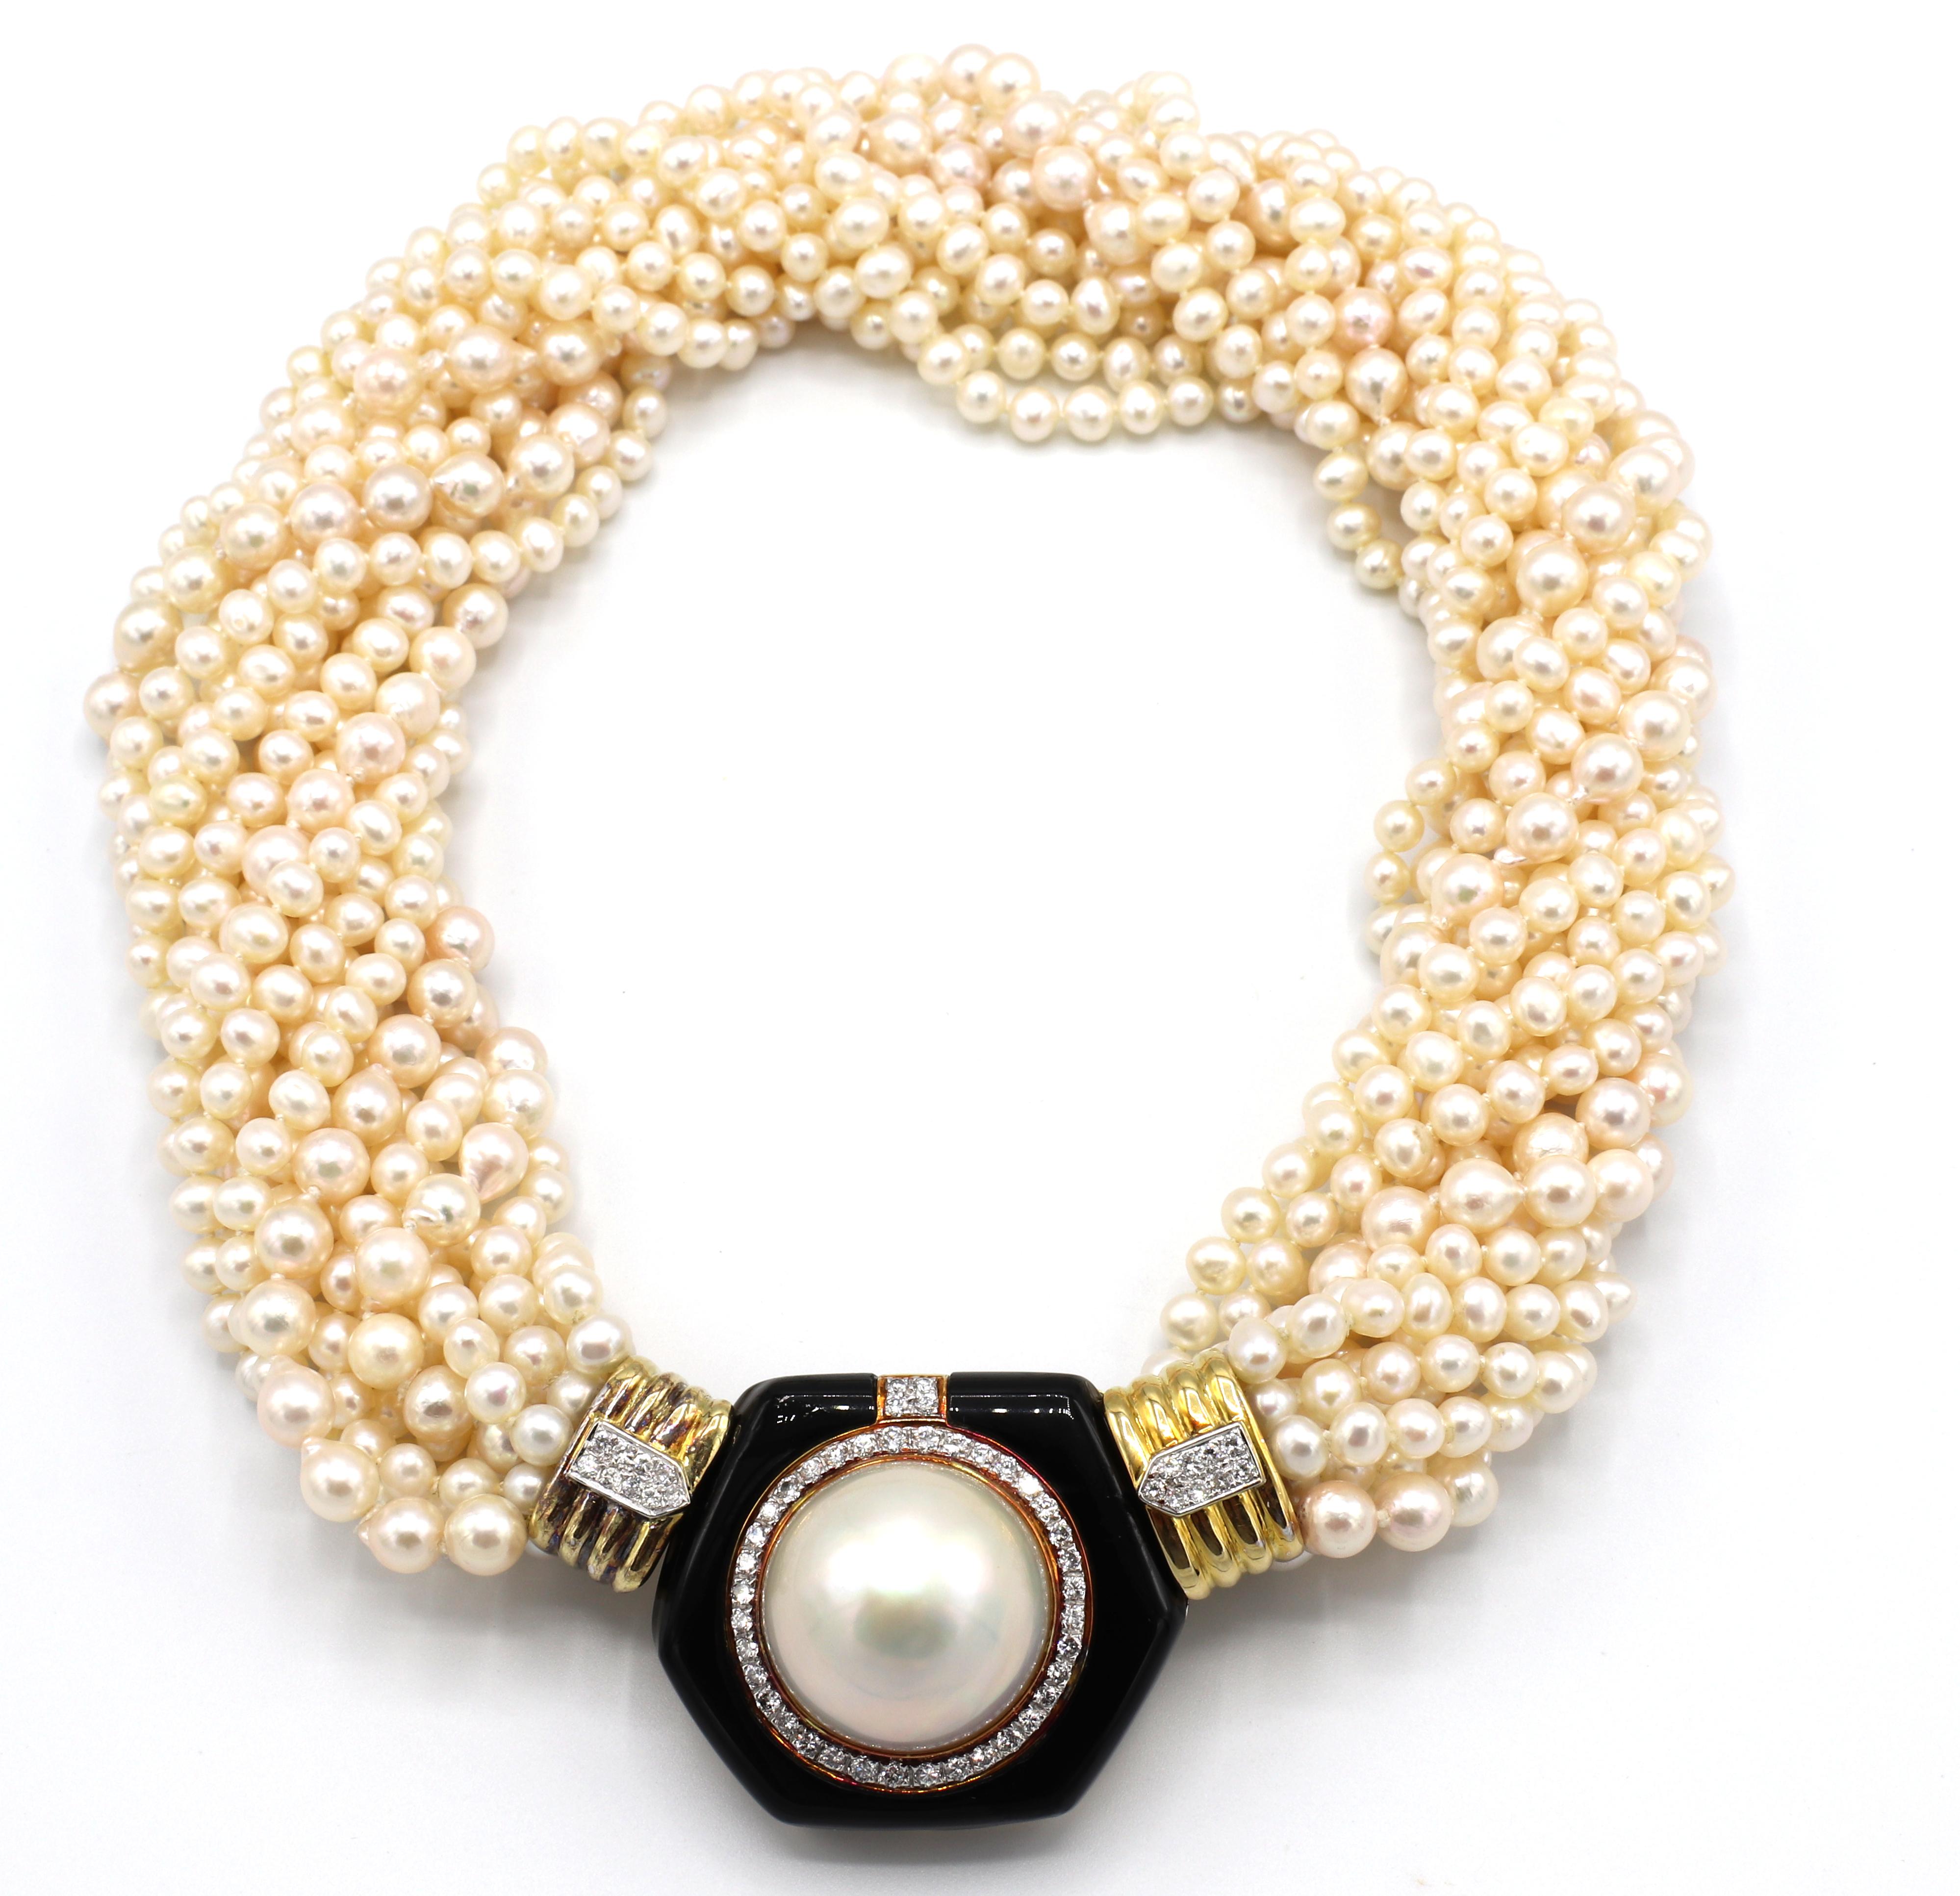 Massive Cultured Pearl, Diamond & Onyx Multi-Strand Pearl Yellow Gold Necklace 
Metal: 14k yellow gold
Weight: 255 grams
Diamonds: Approx. 2 CTW G VS
Pearls: 13 rows of round/oval/baroque cultured white pearls with a creamy luster 5-6.5mm
Clasp: 35